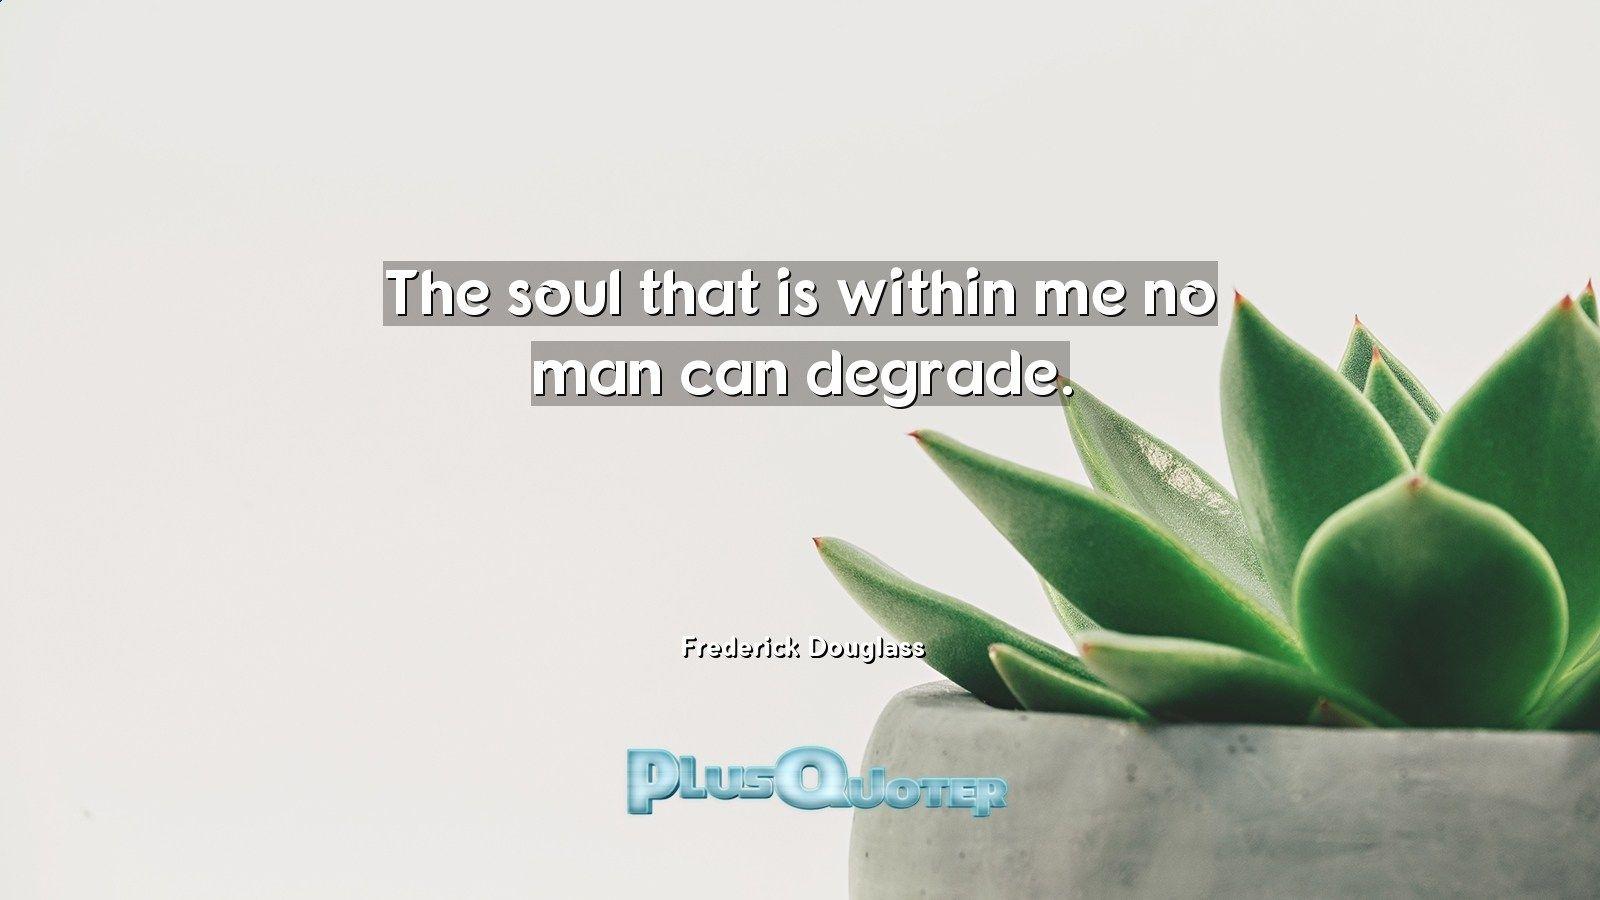 The soul that is within me no man can degrade- Frederick Douglass